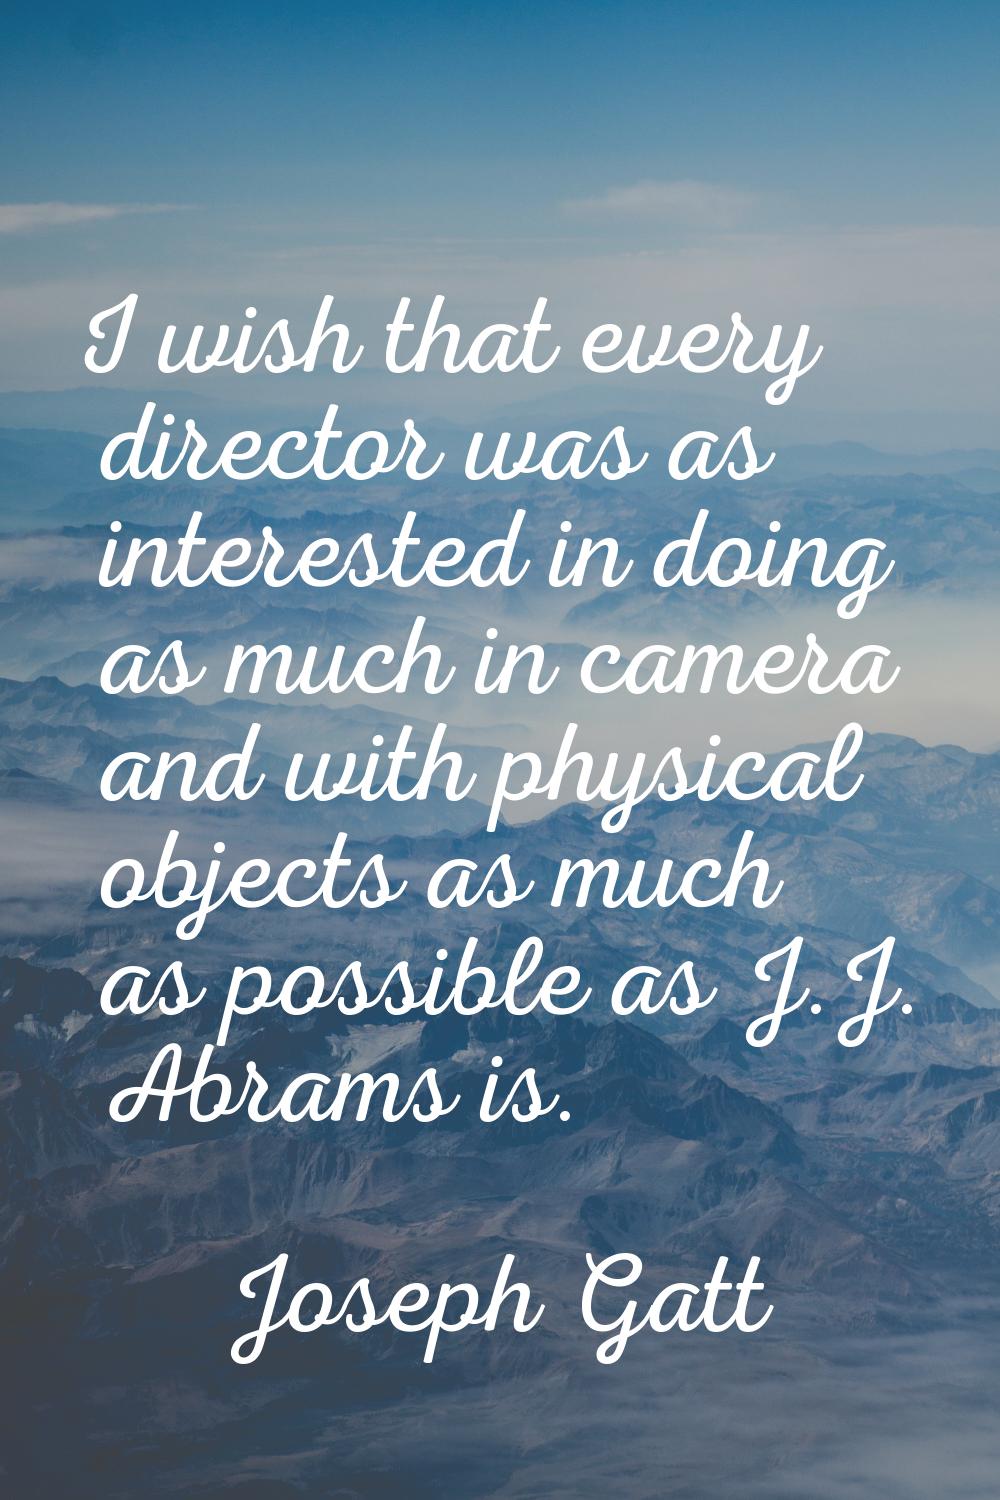 I wish that every director was as interested in doing as much in camera and with physical objects a